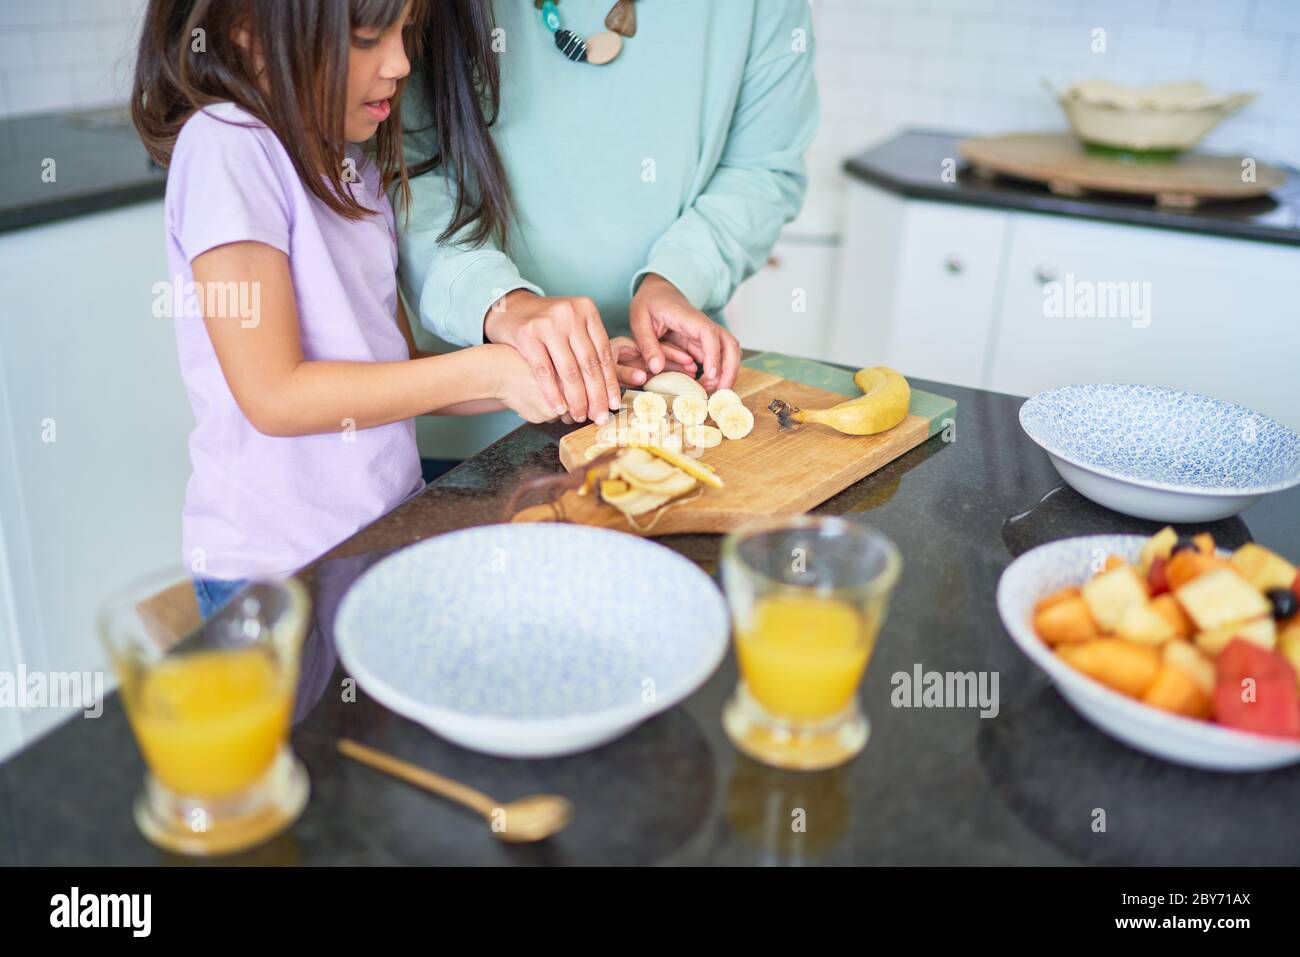 Mother and daughter cutting bananas in kitchen Stock Photo